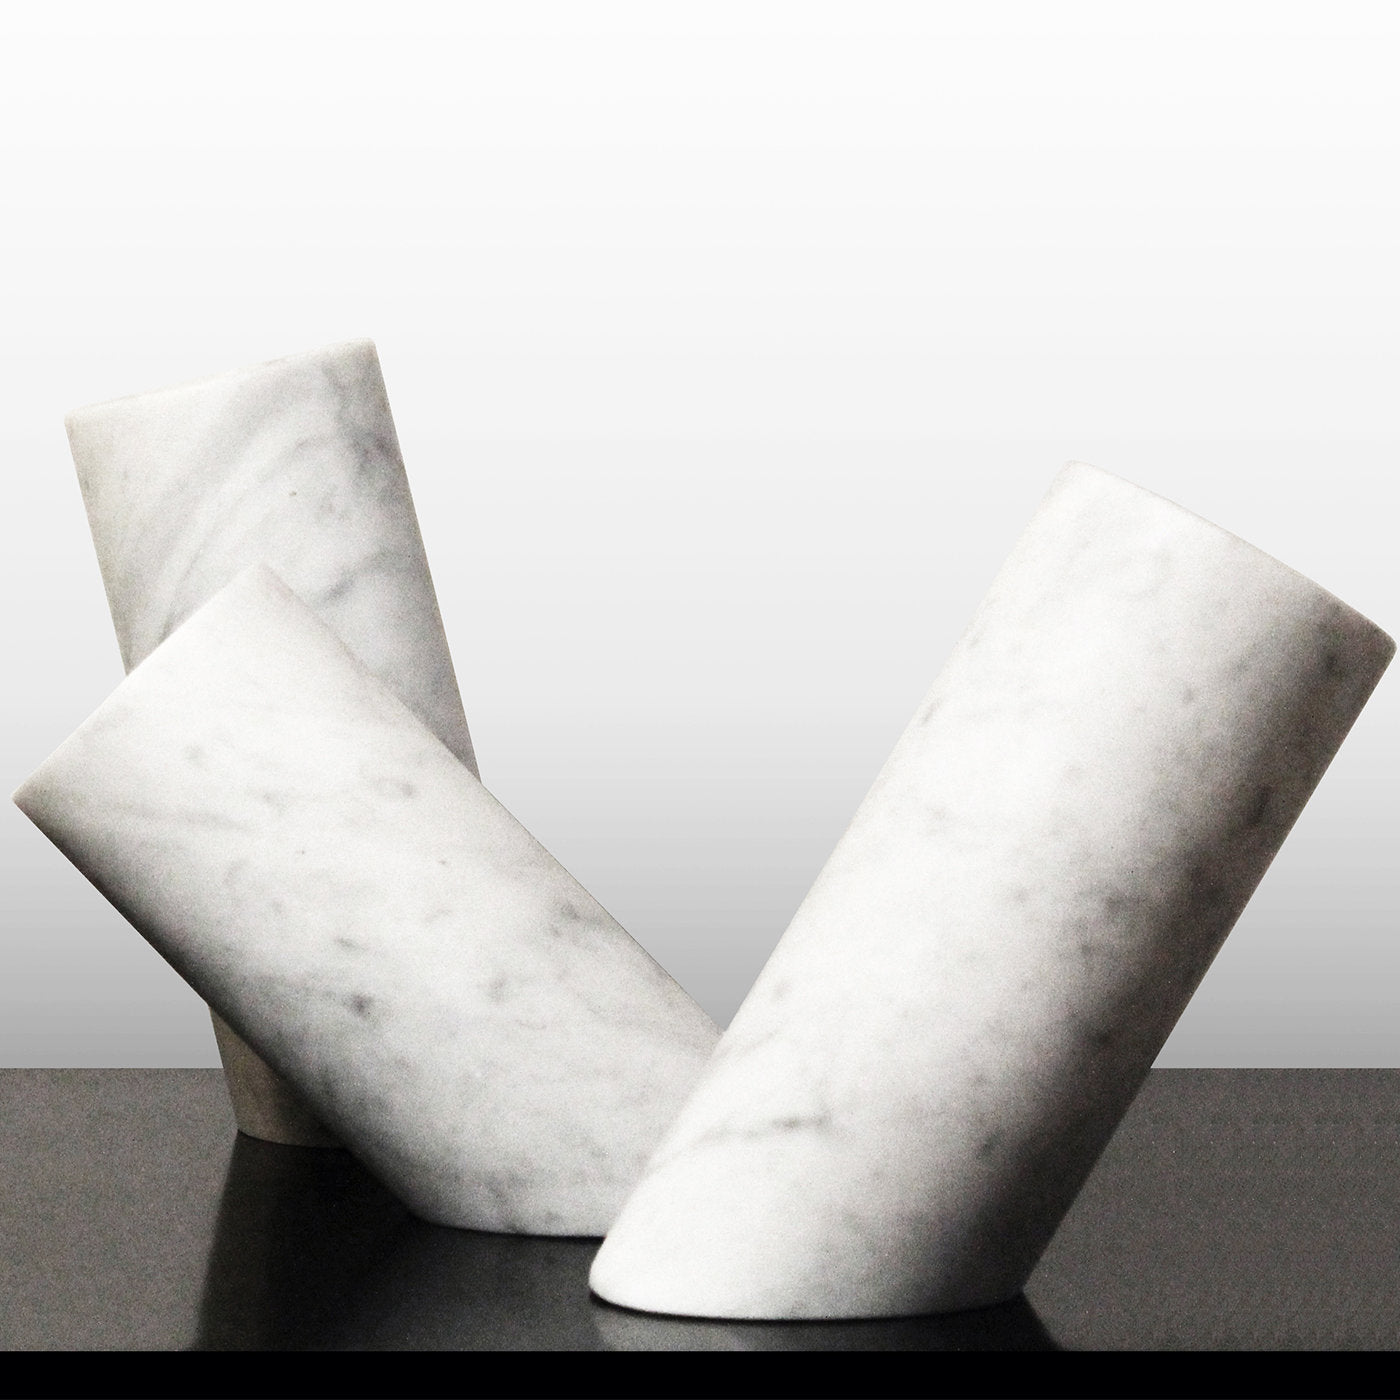 In Equilibrio Set of 4 Vases by Moreno Ratti - Alternative view 1